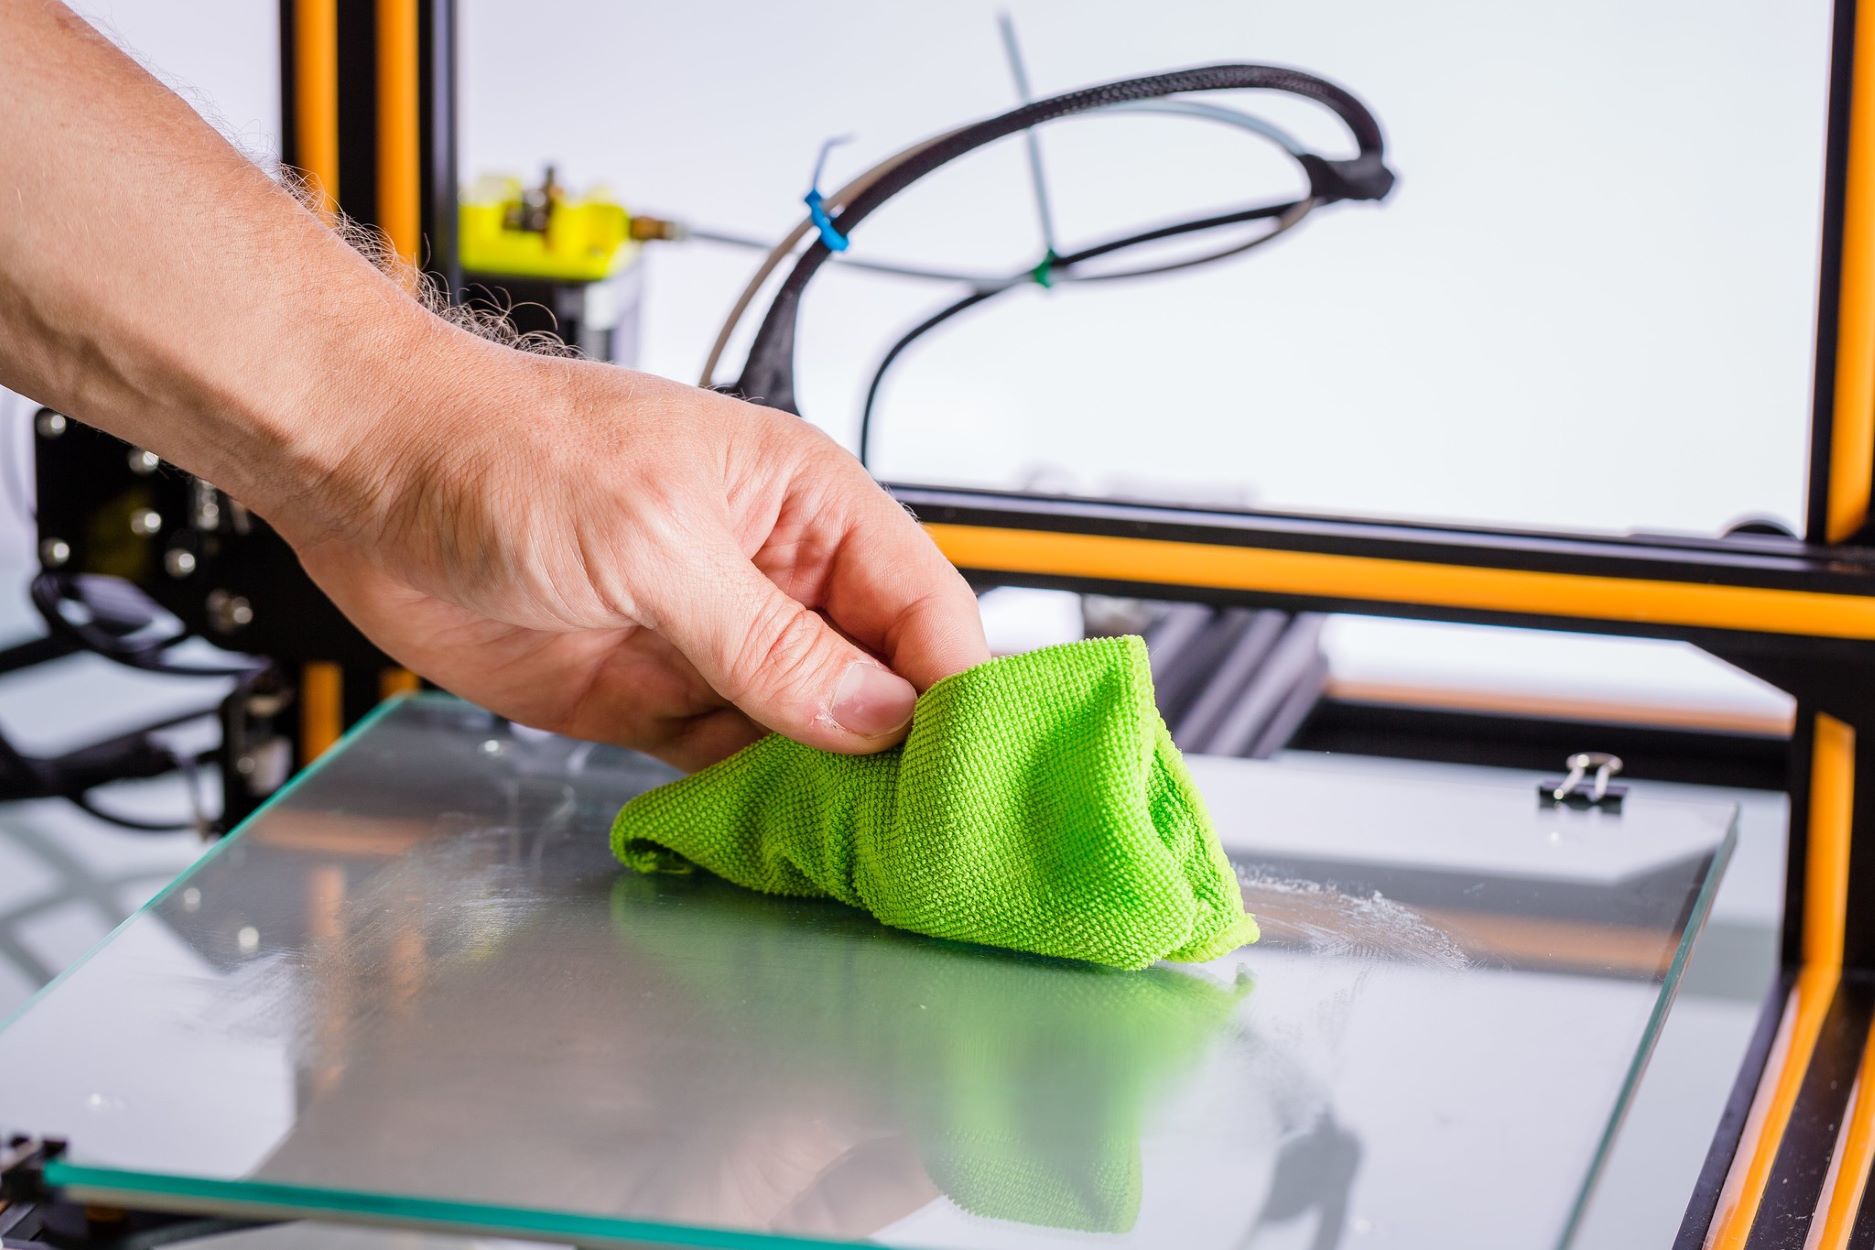 How To Clean Glass 3D Printer Bed